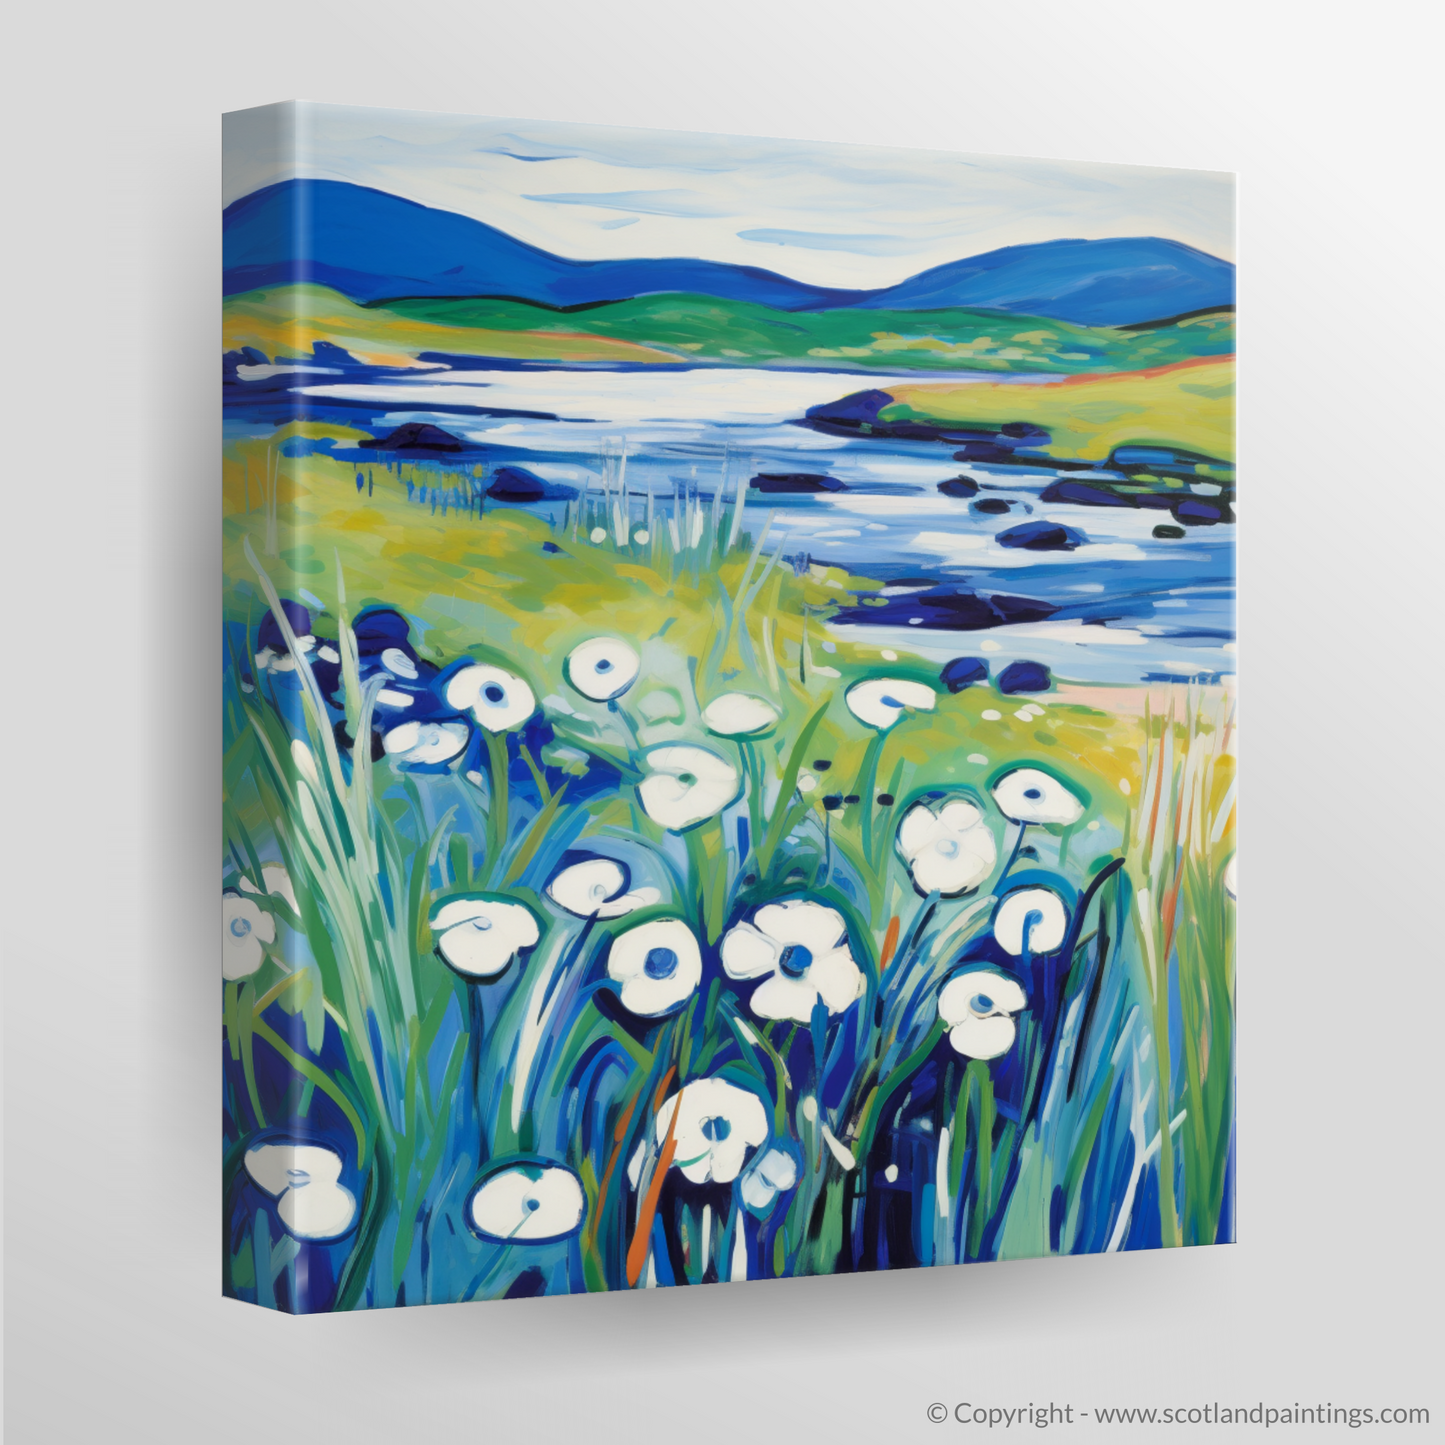 Wild Cotton Grass Fauvism: A Tribute to the Isle of Skye's Upland Bogs